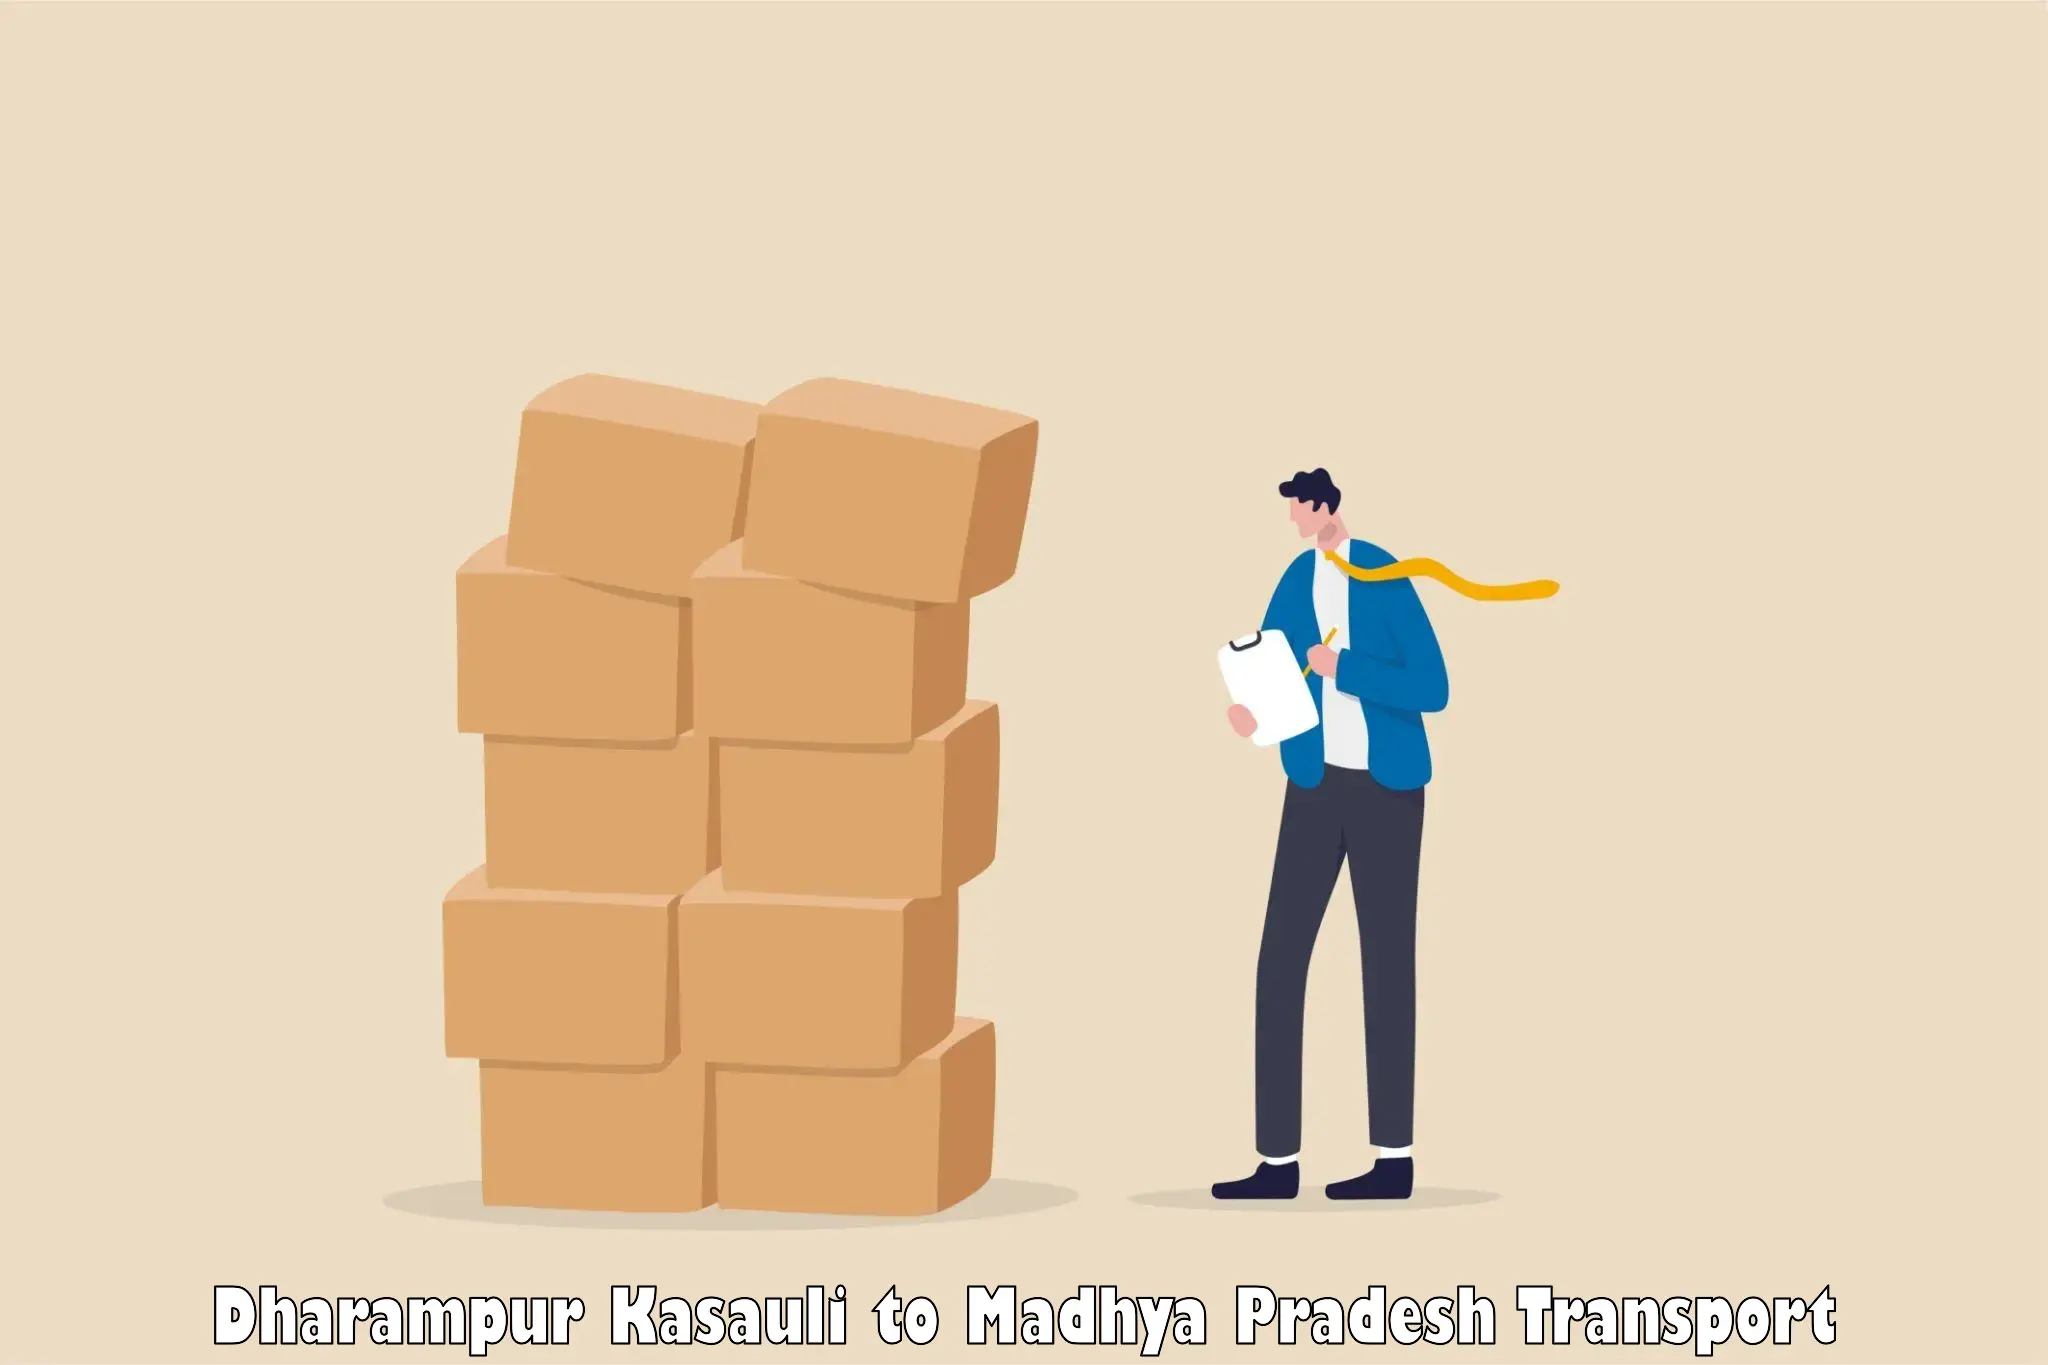 Express transport services in Dharampur Kasauli to Shahgarh